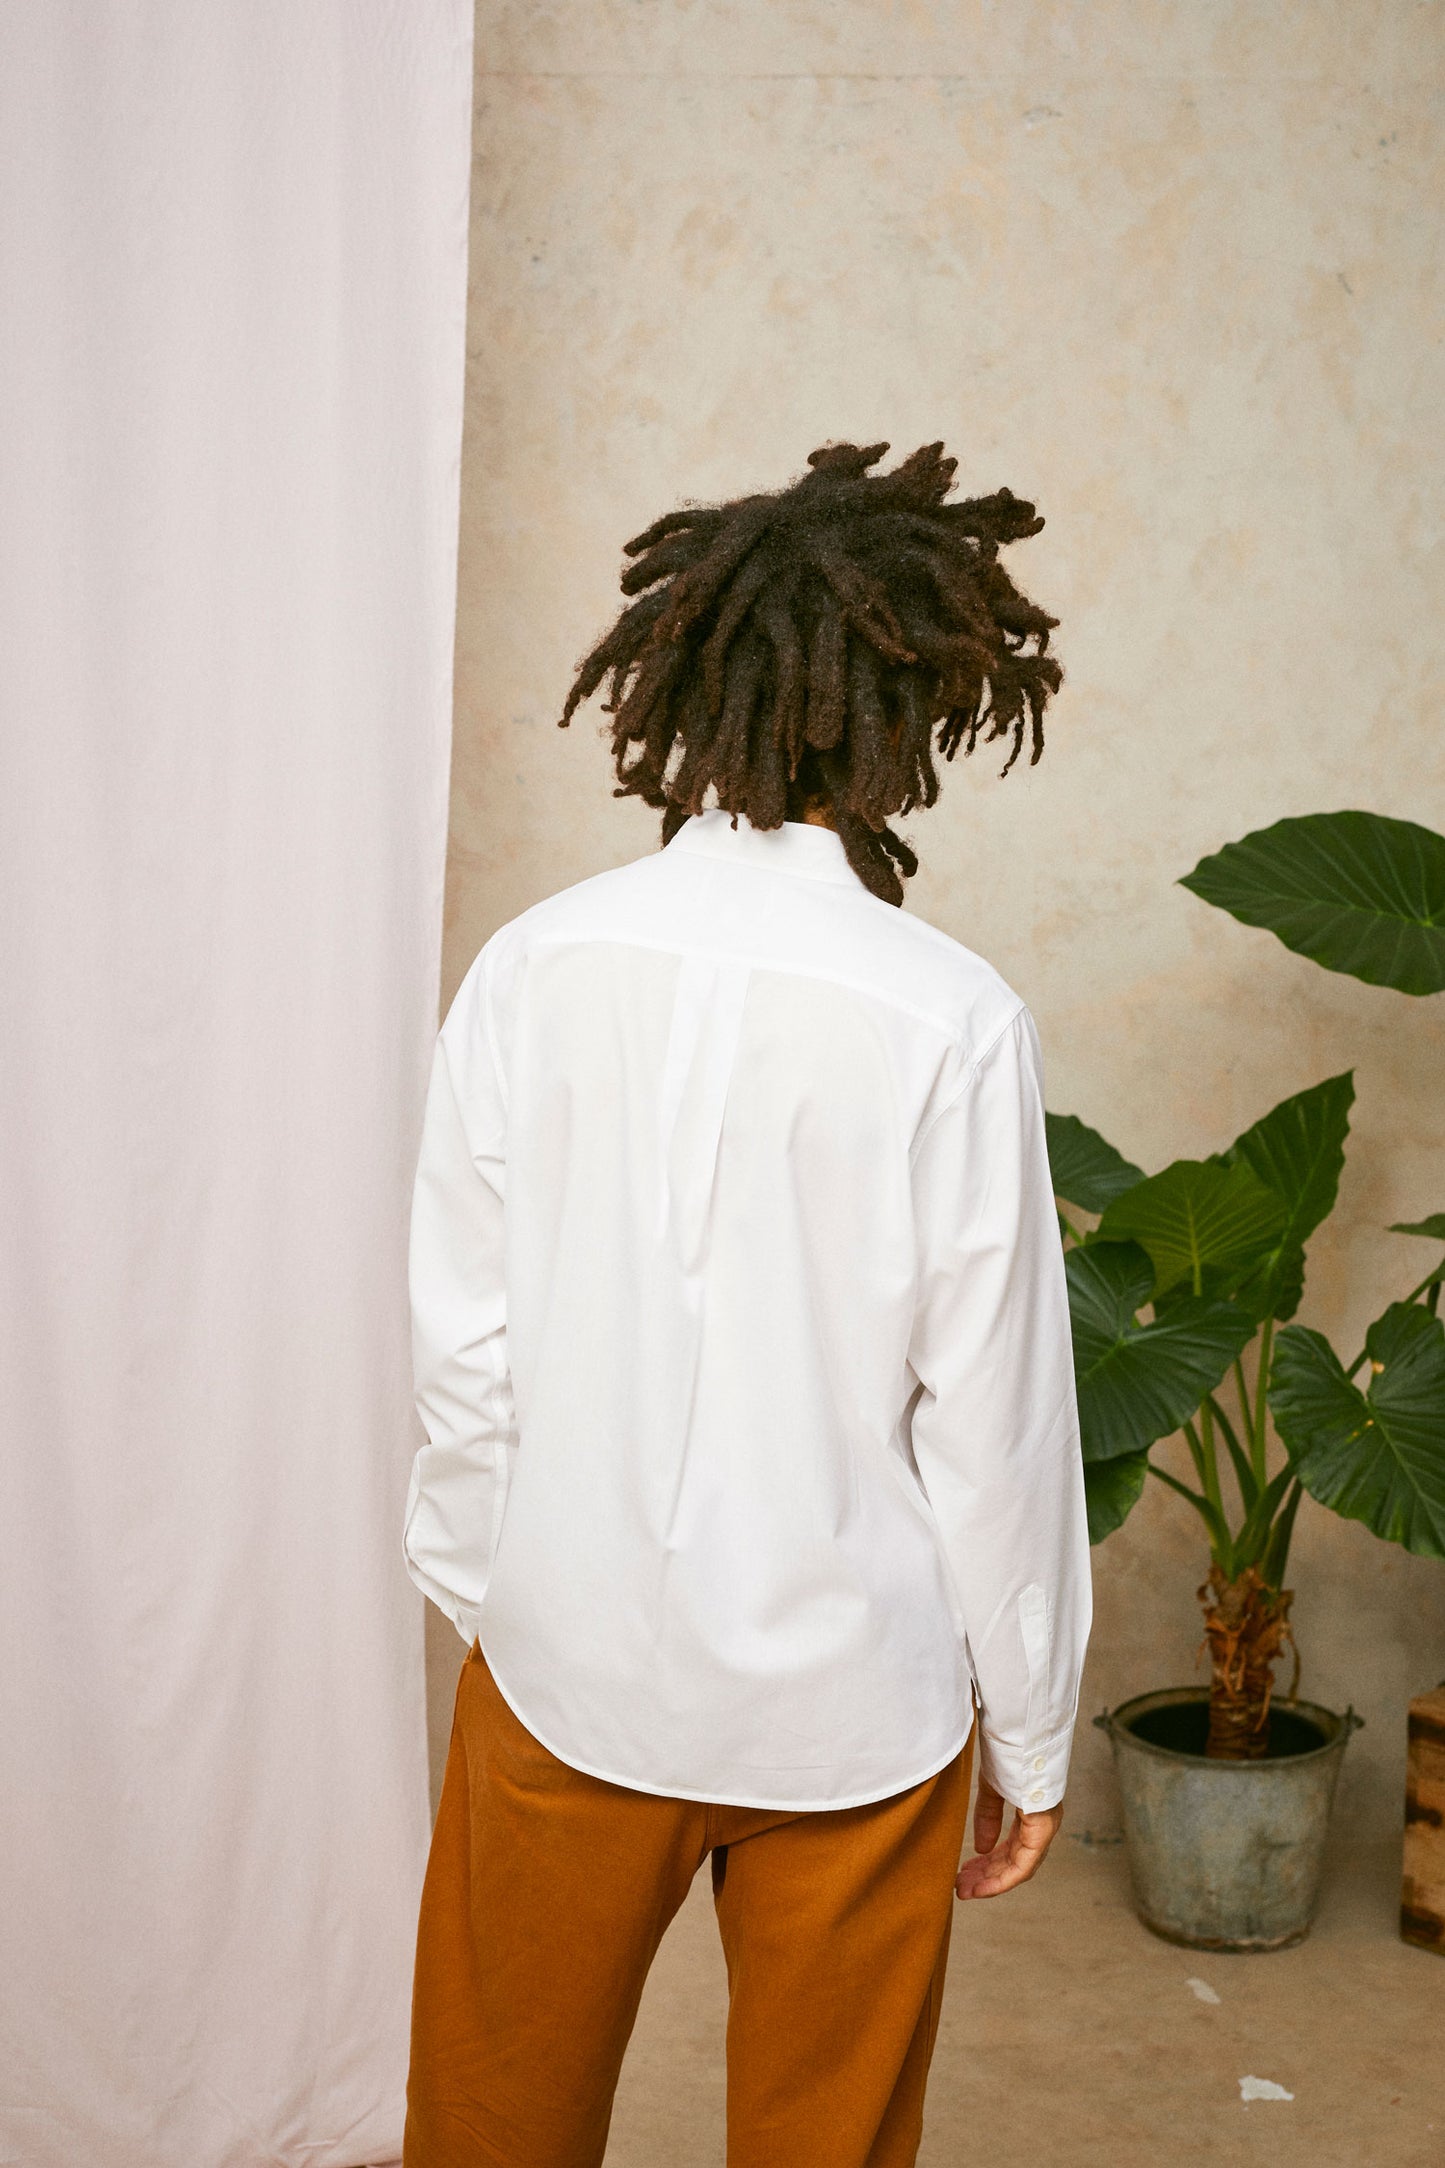 Back view of model wearing Saywood's Eddy Mens mens white Shirt with patch pockets; showing the back yoke and box pleat in the back. Worn with tabacco trousers. Model has one hand in his trouser pocket. A plant and drop of pink fabric can be seen in the background.